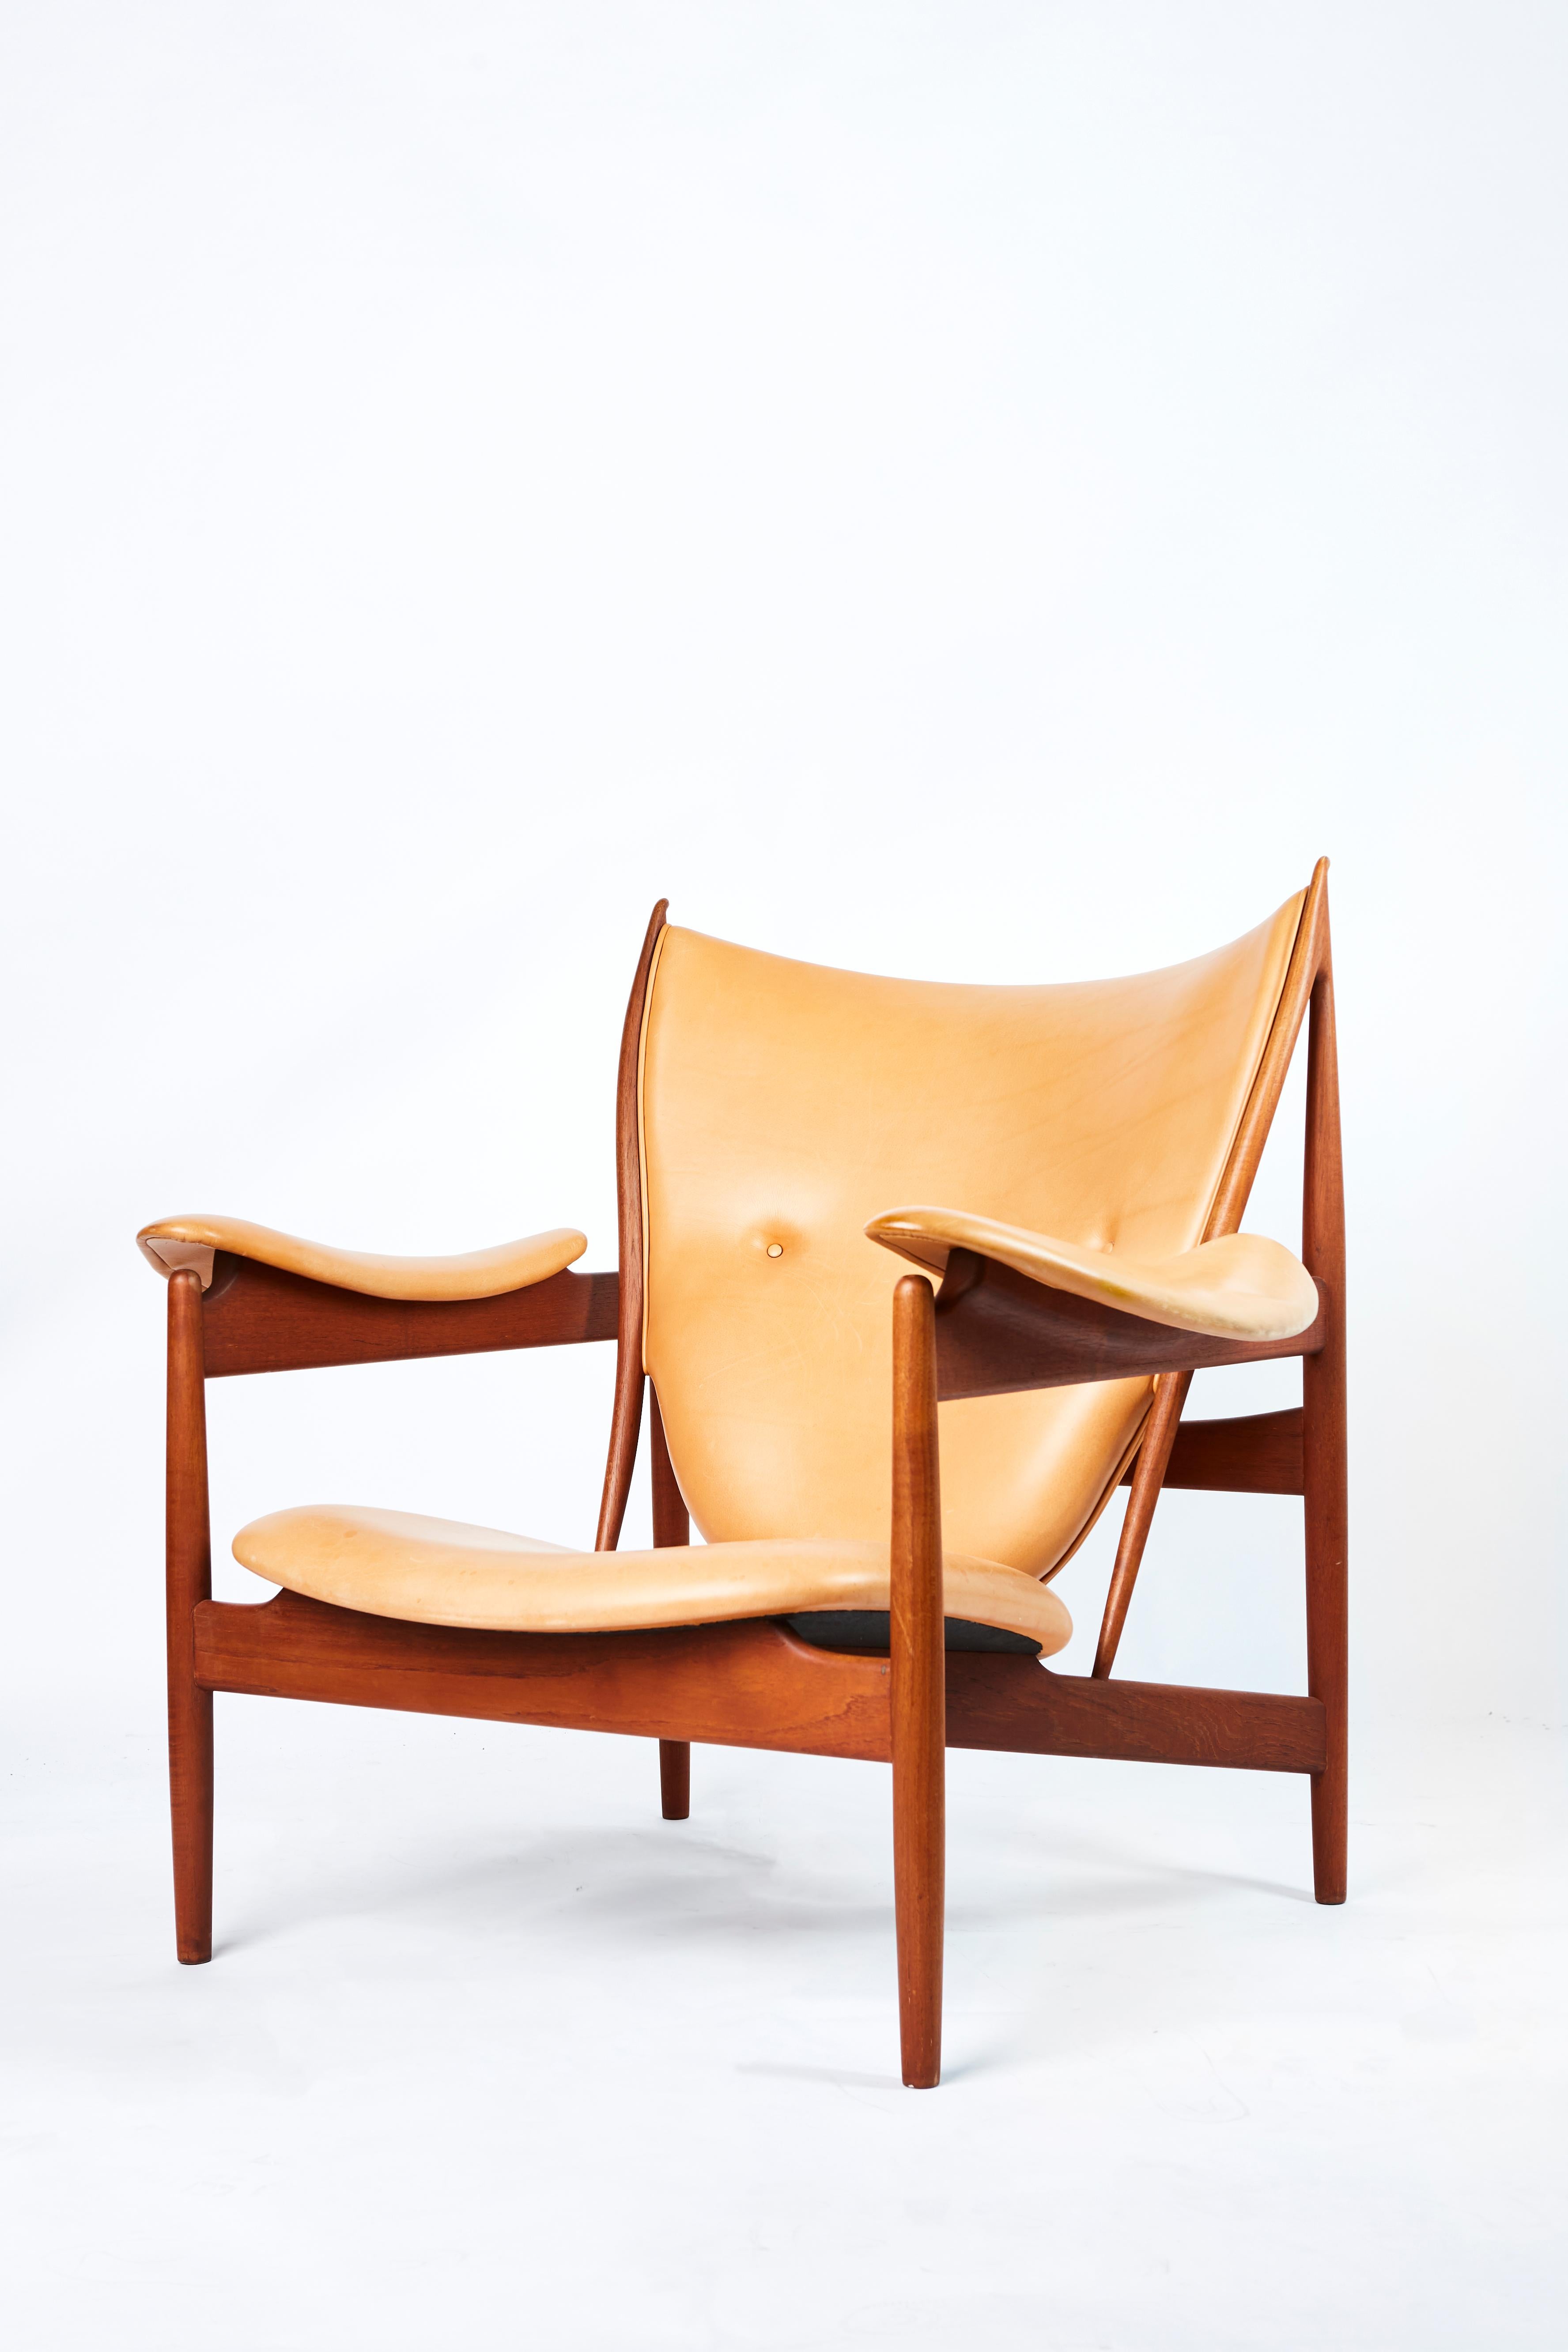 An absolutely beautiful piece of furniture is on offer here. 

Finn Juhl's 1949 masterpiece, the chieftain chair, employs iconography of tribal forms and Juhl’s innovative approach to design which accentuates the separation of the seat, back, and